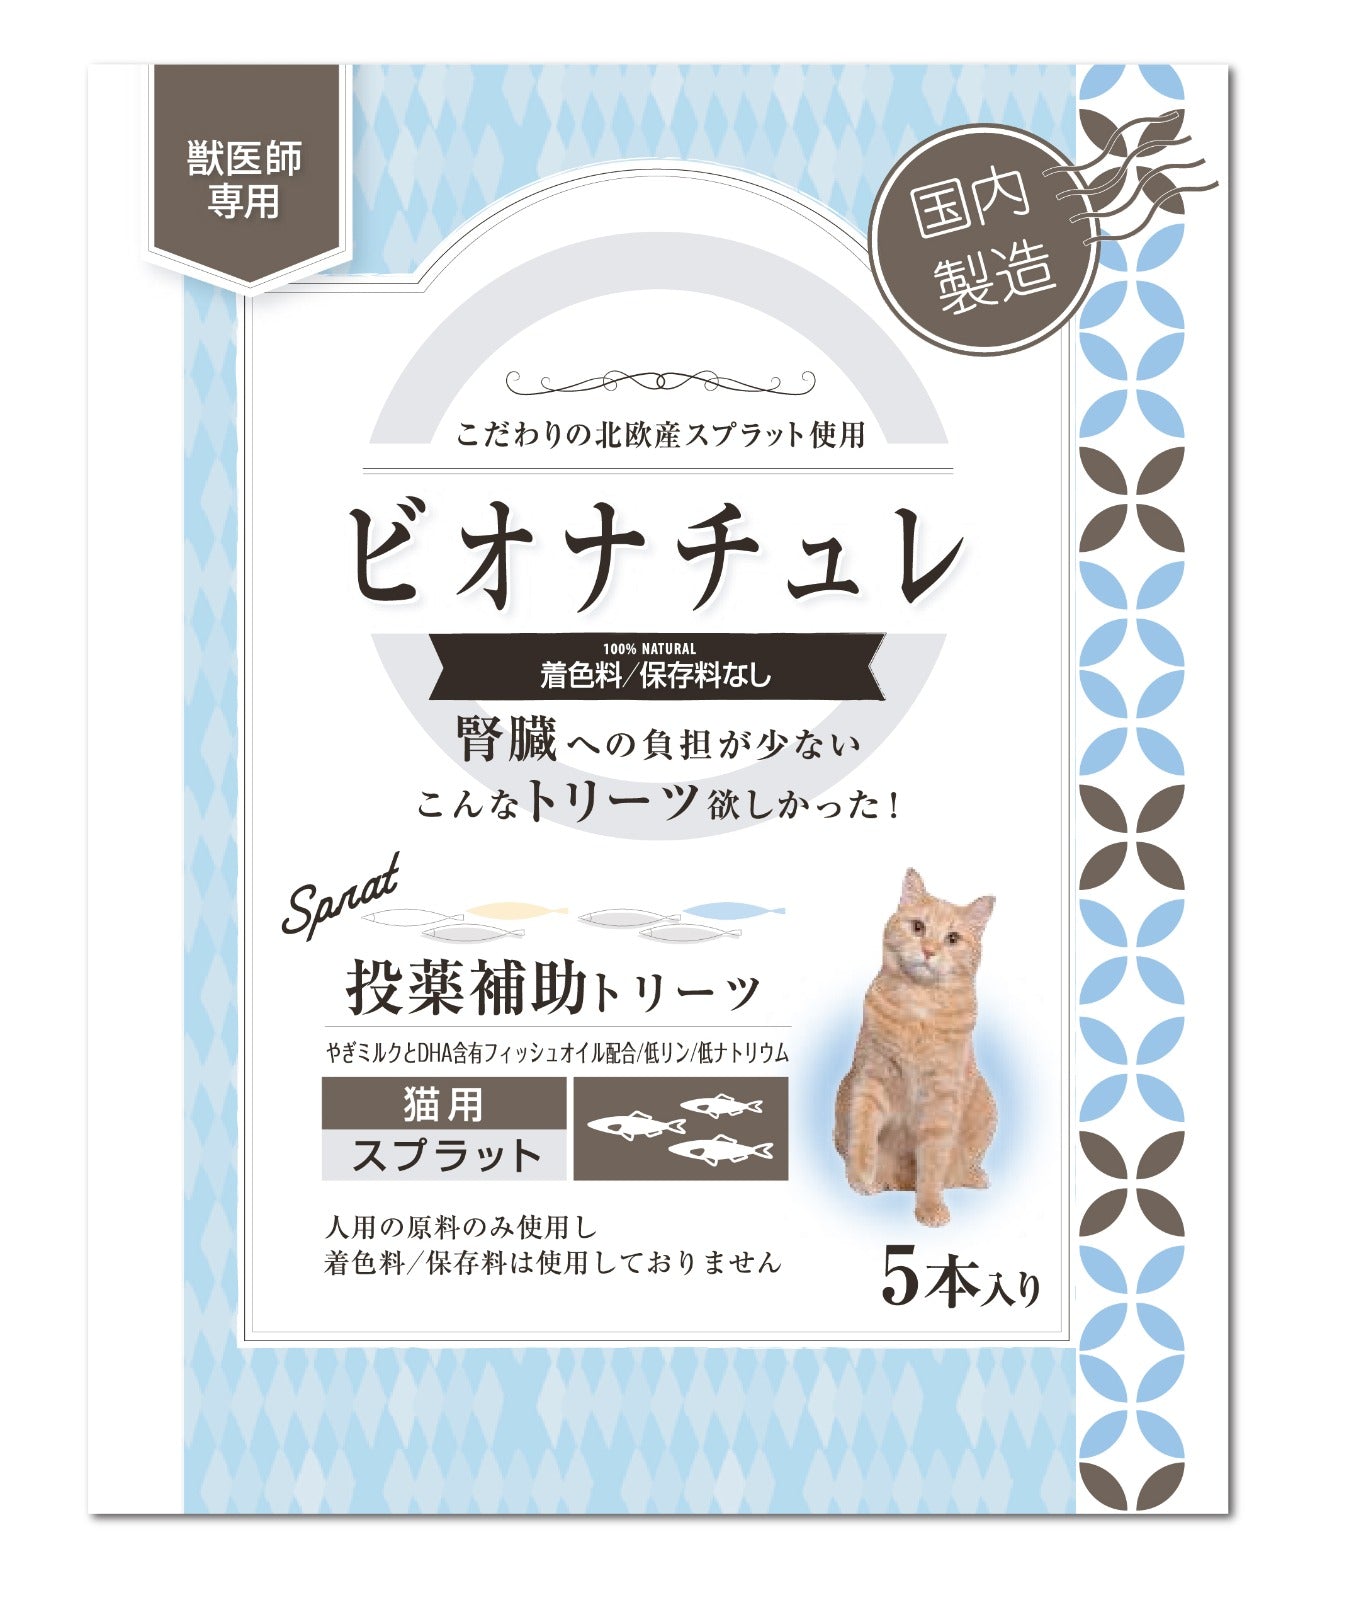 Subscription Bundle: Bionature Kidney Friendly Treat Stick for Cats (30 sticks / 1 month supply)